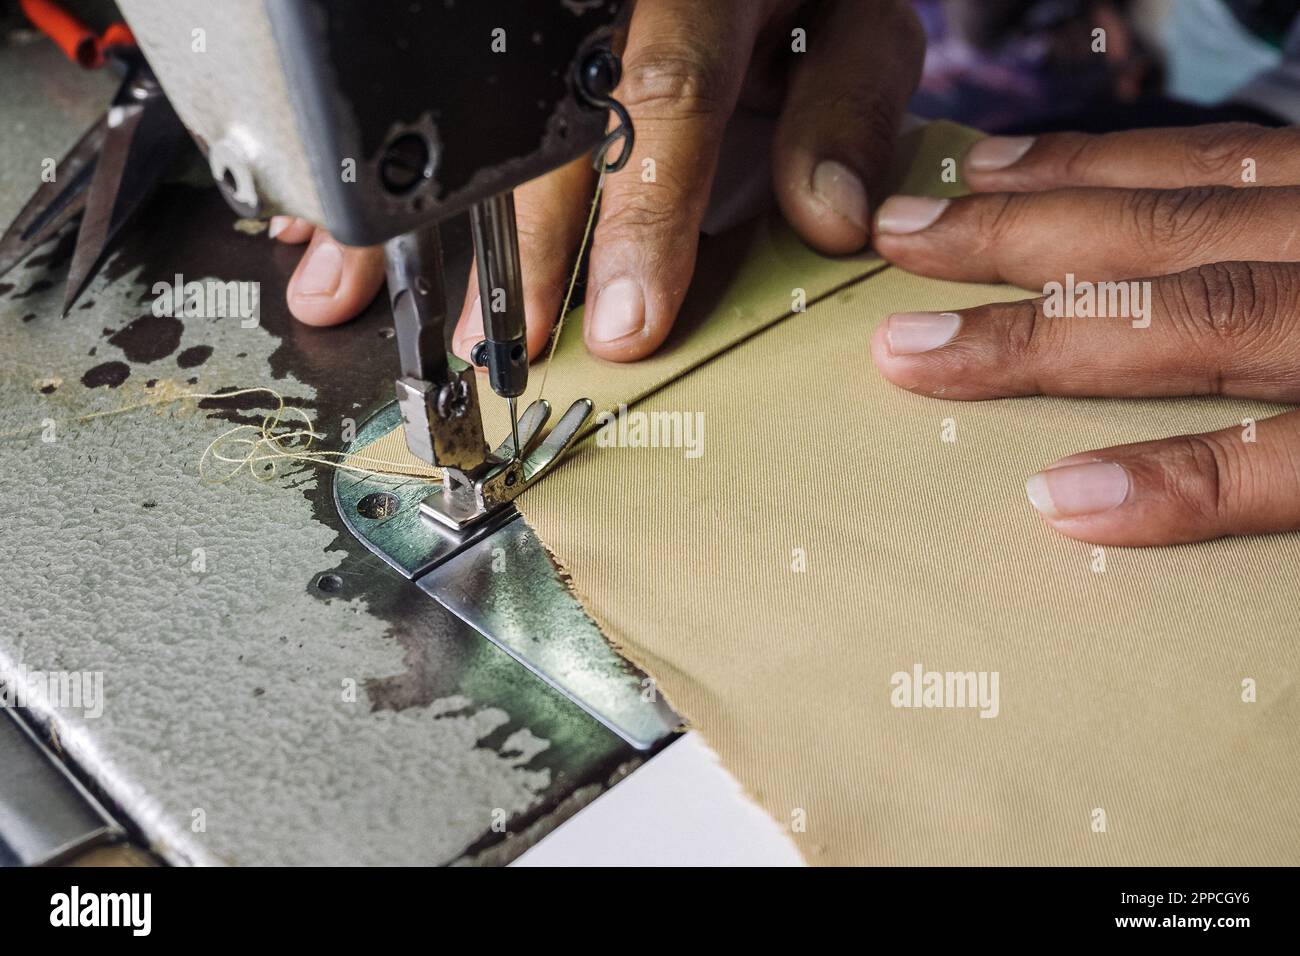 Stitching fabric on professional manufacturing machine at workplace. Close up view of sewing process. Tailoring at the factory. Blurred background. Stock Photo